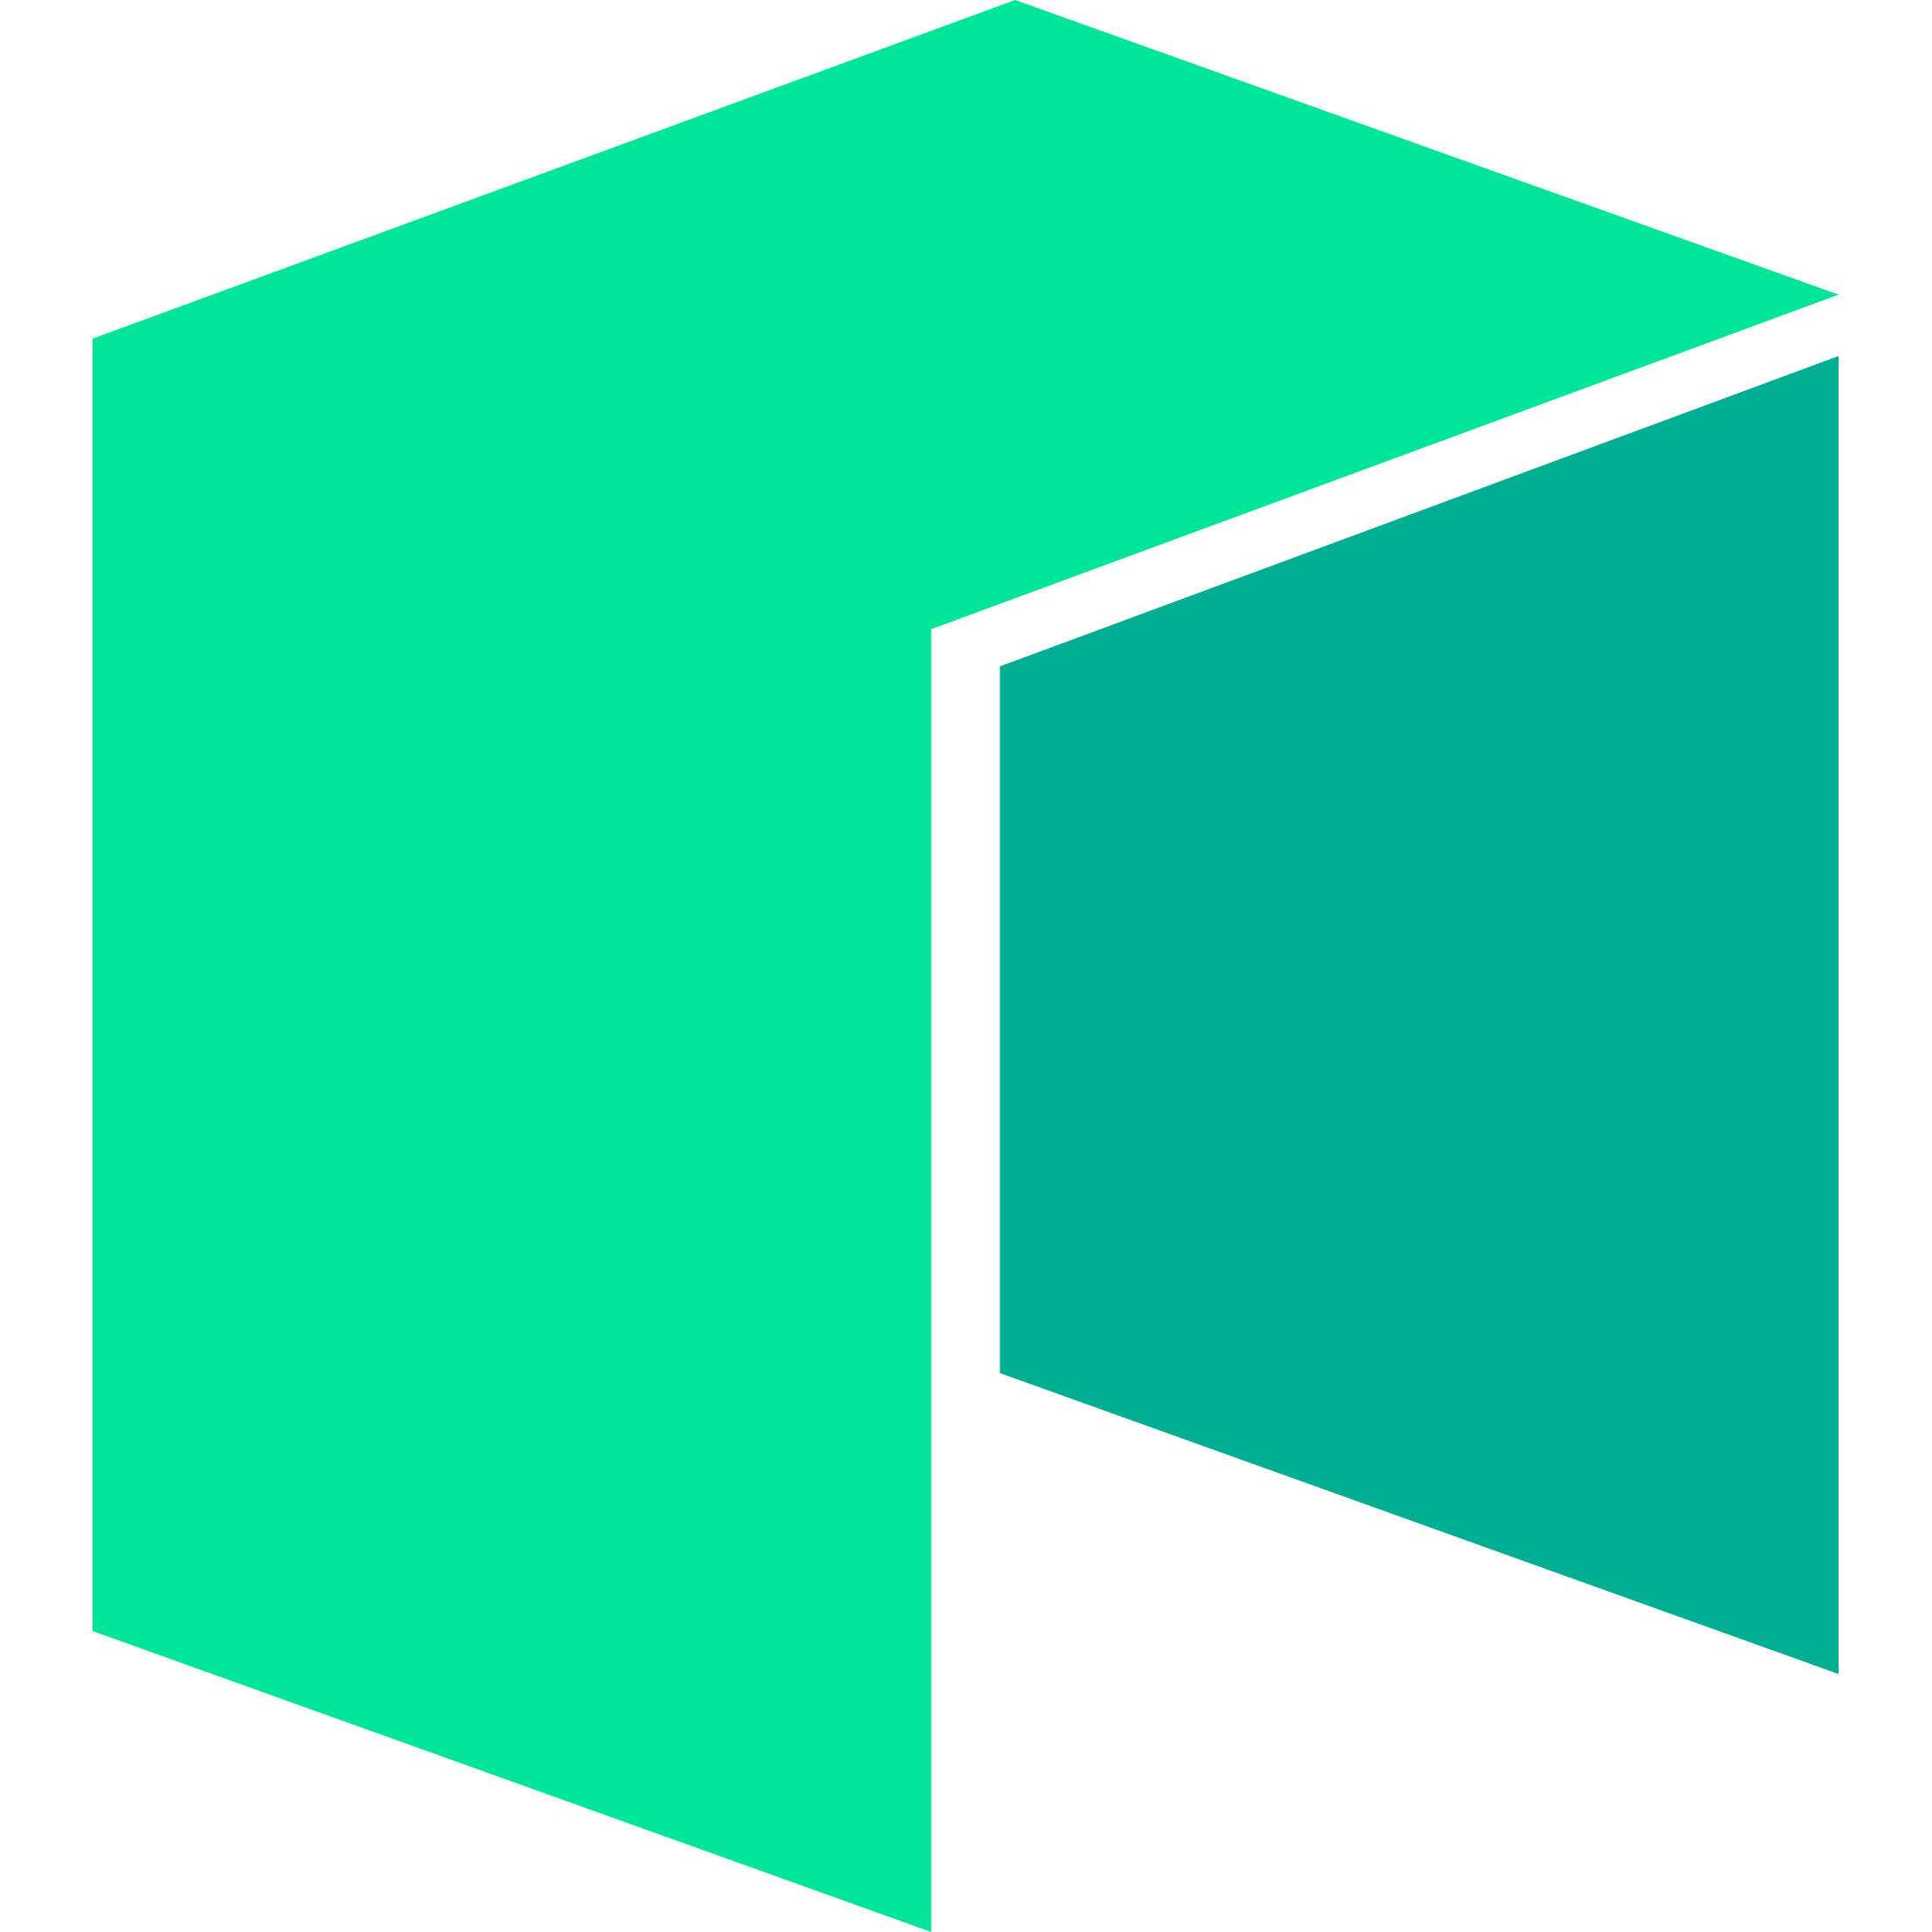 Image of Solidity programming language logo for smart contract development